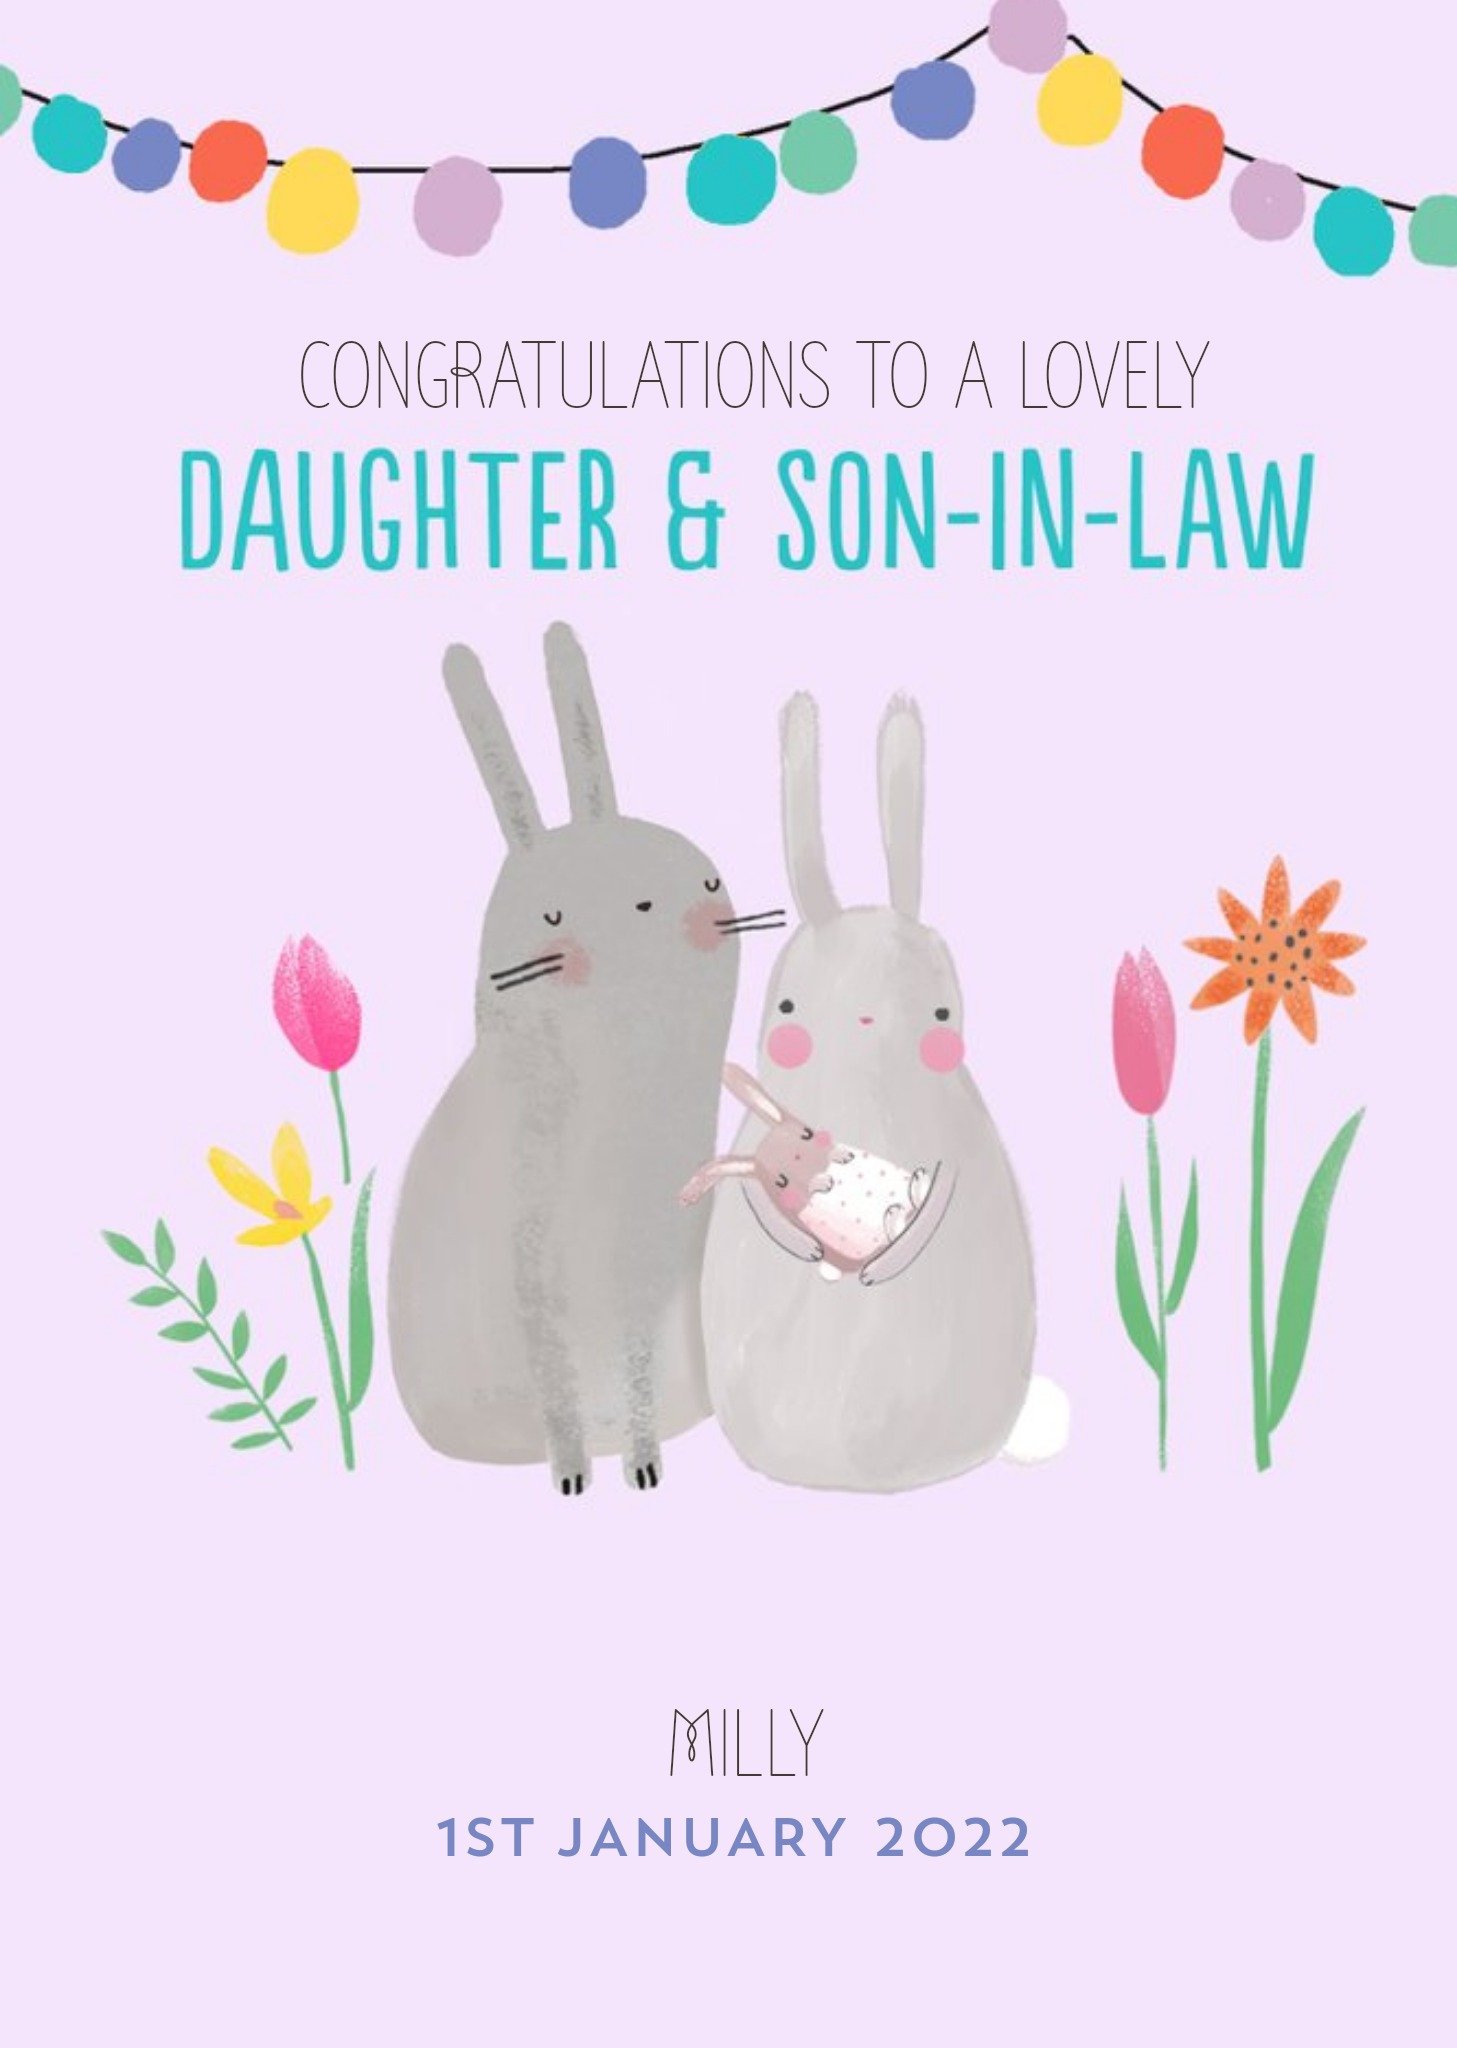 Moonpig Cute Illustrative Daughter & Son-In-Law New Baby Card Ecard